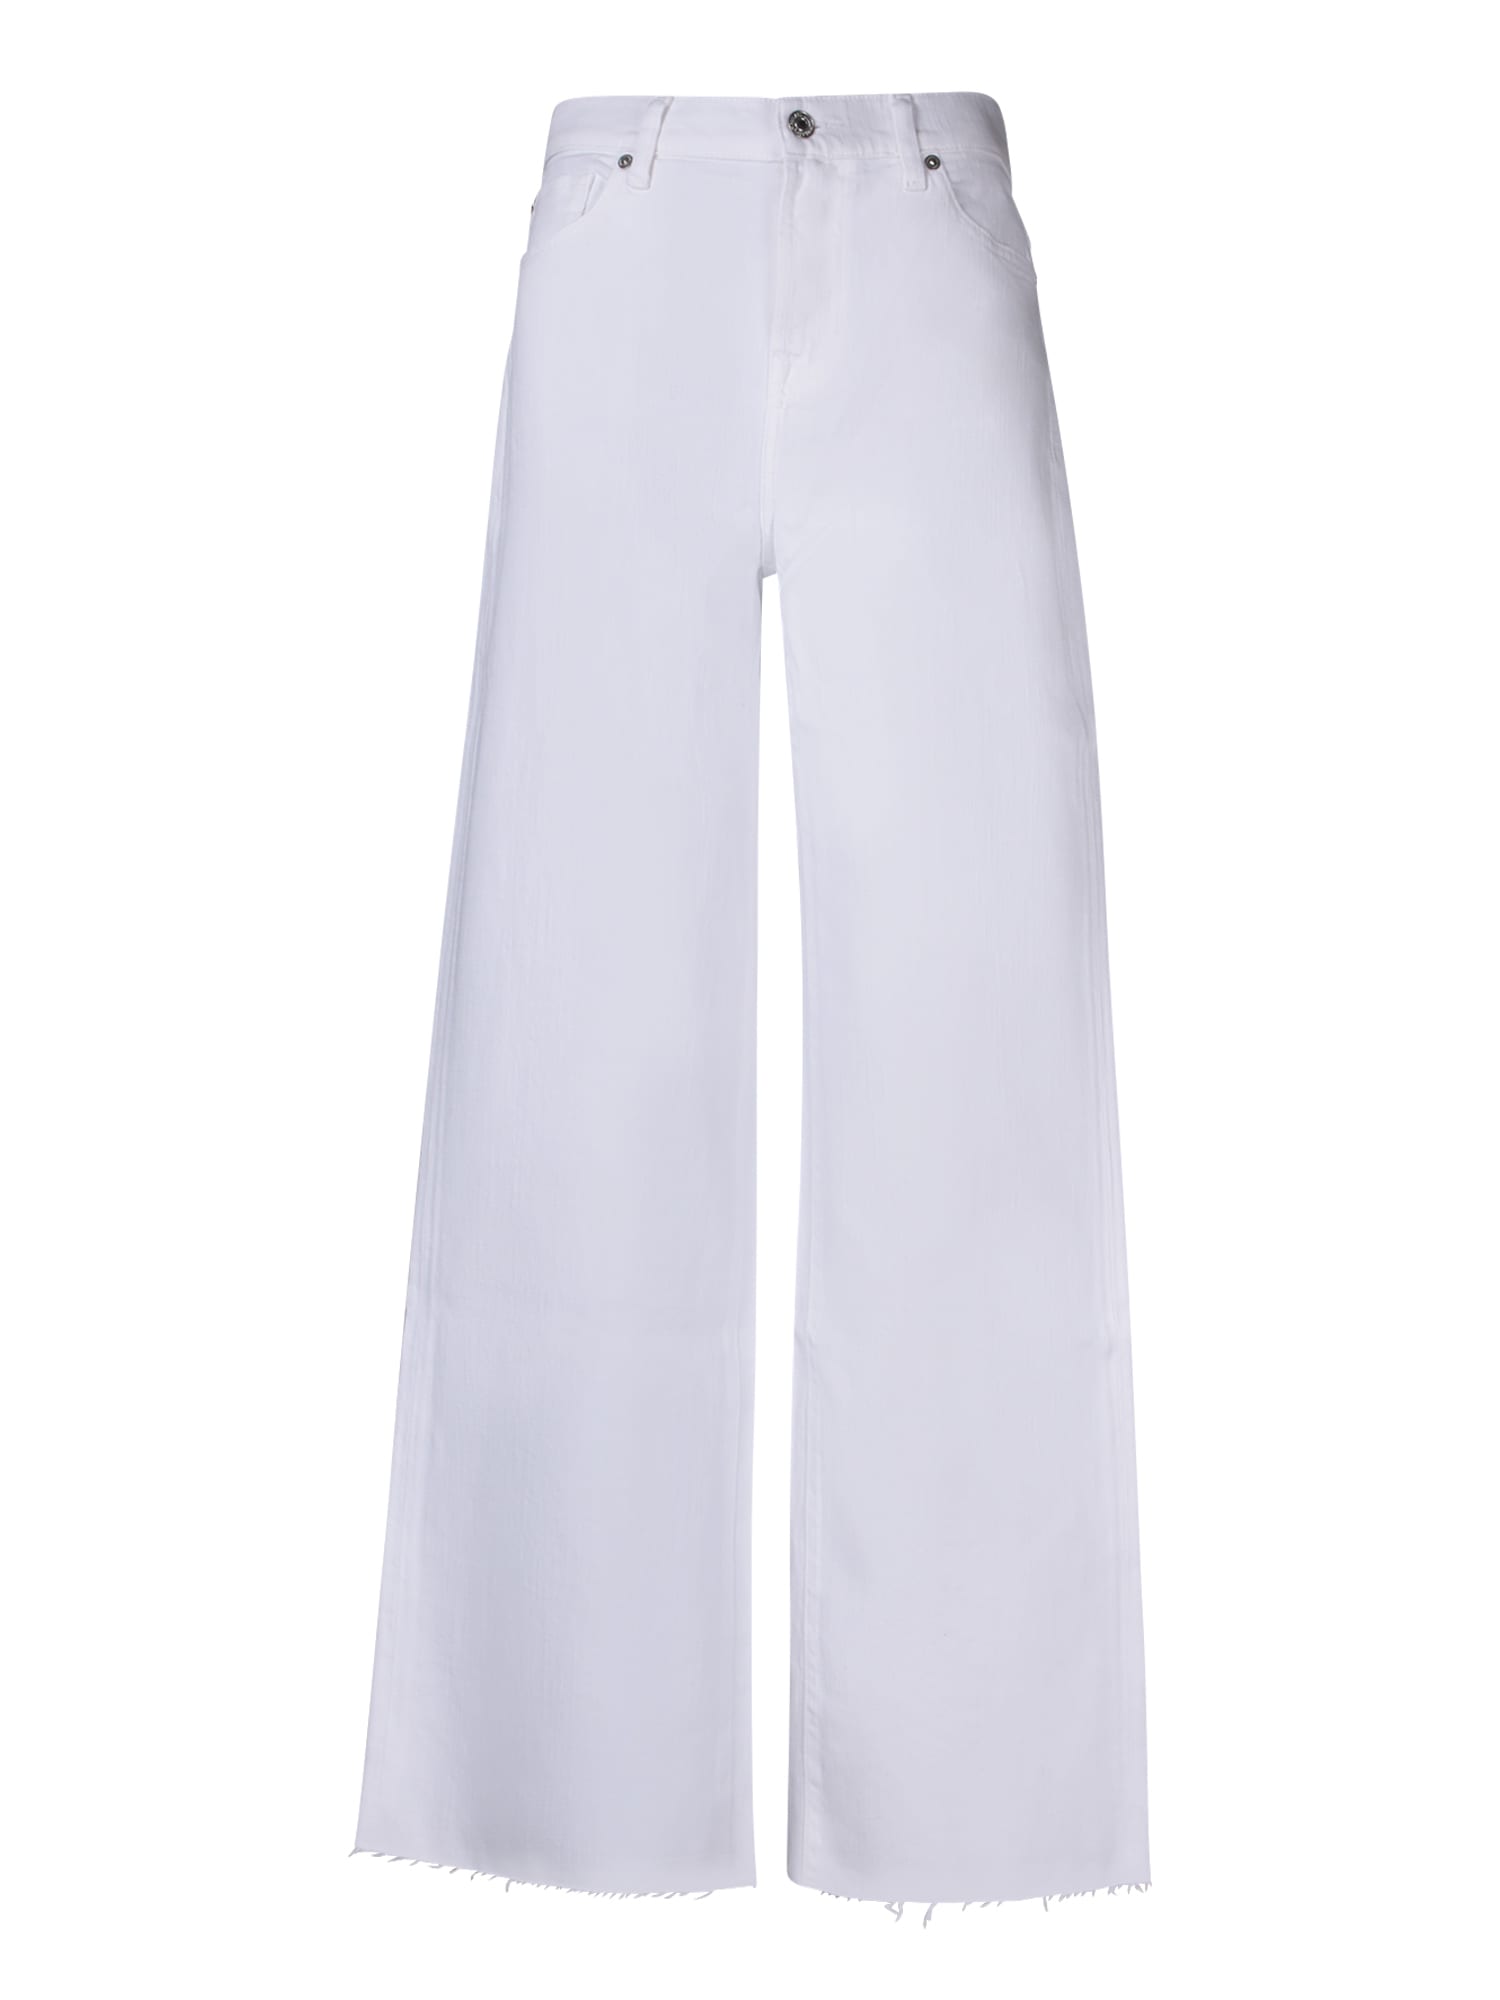 Shop 7 For All Mankind Scout White Jeans